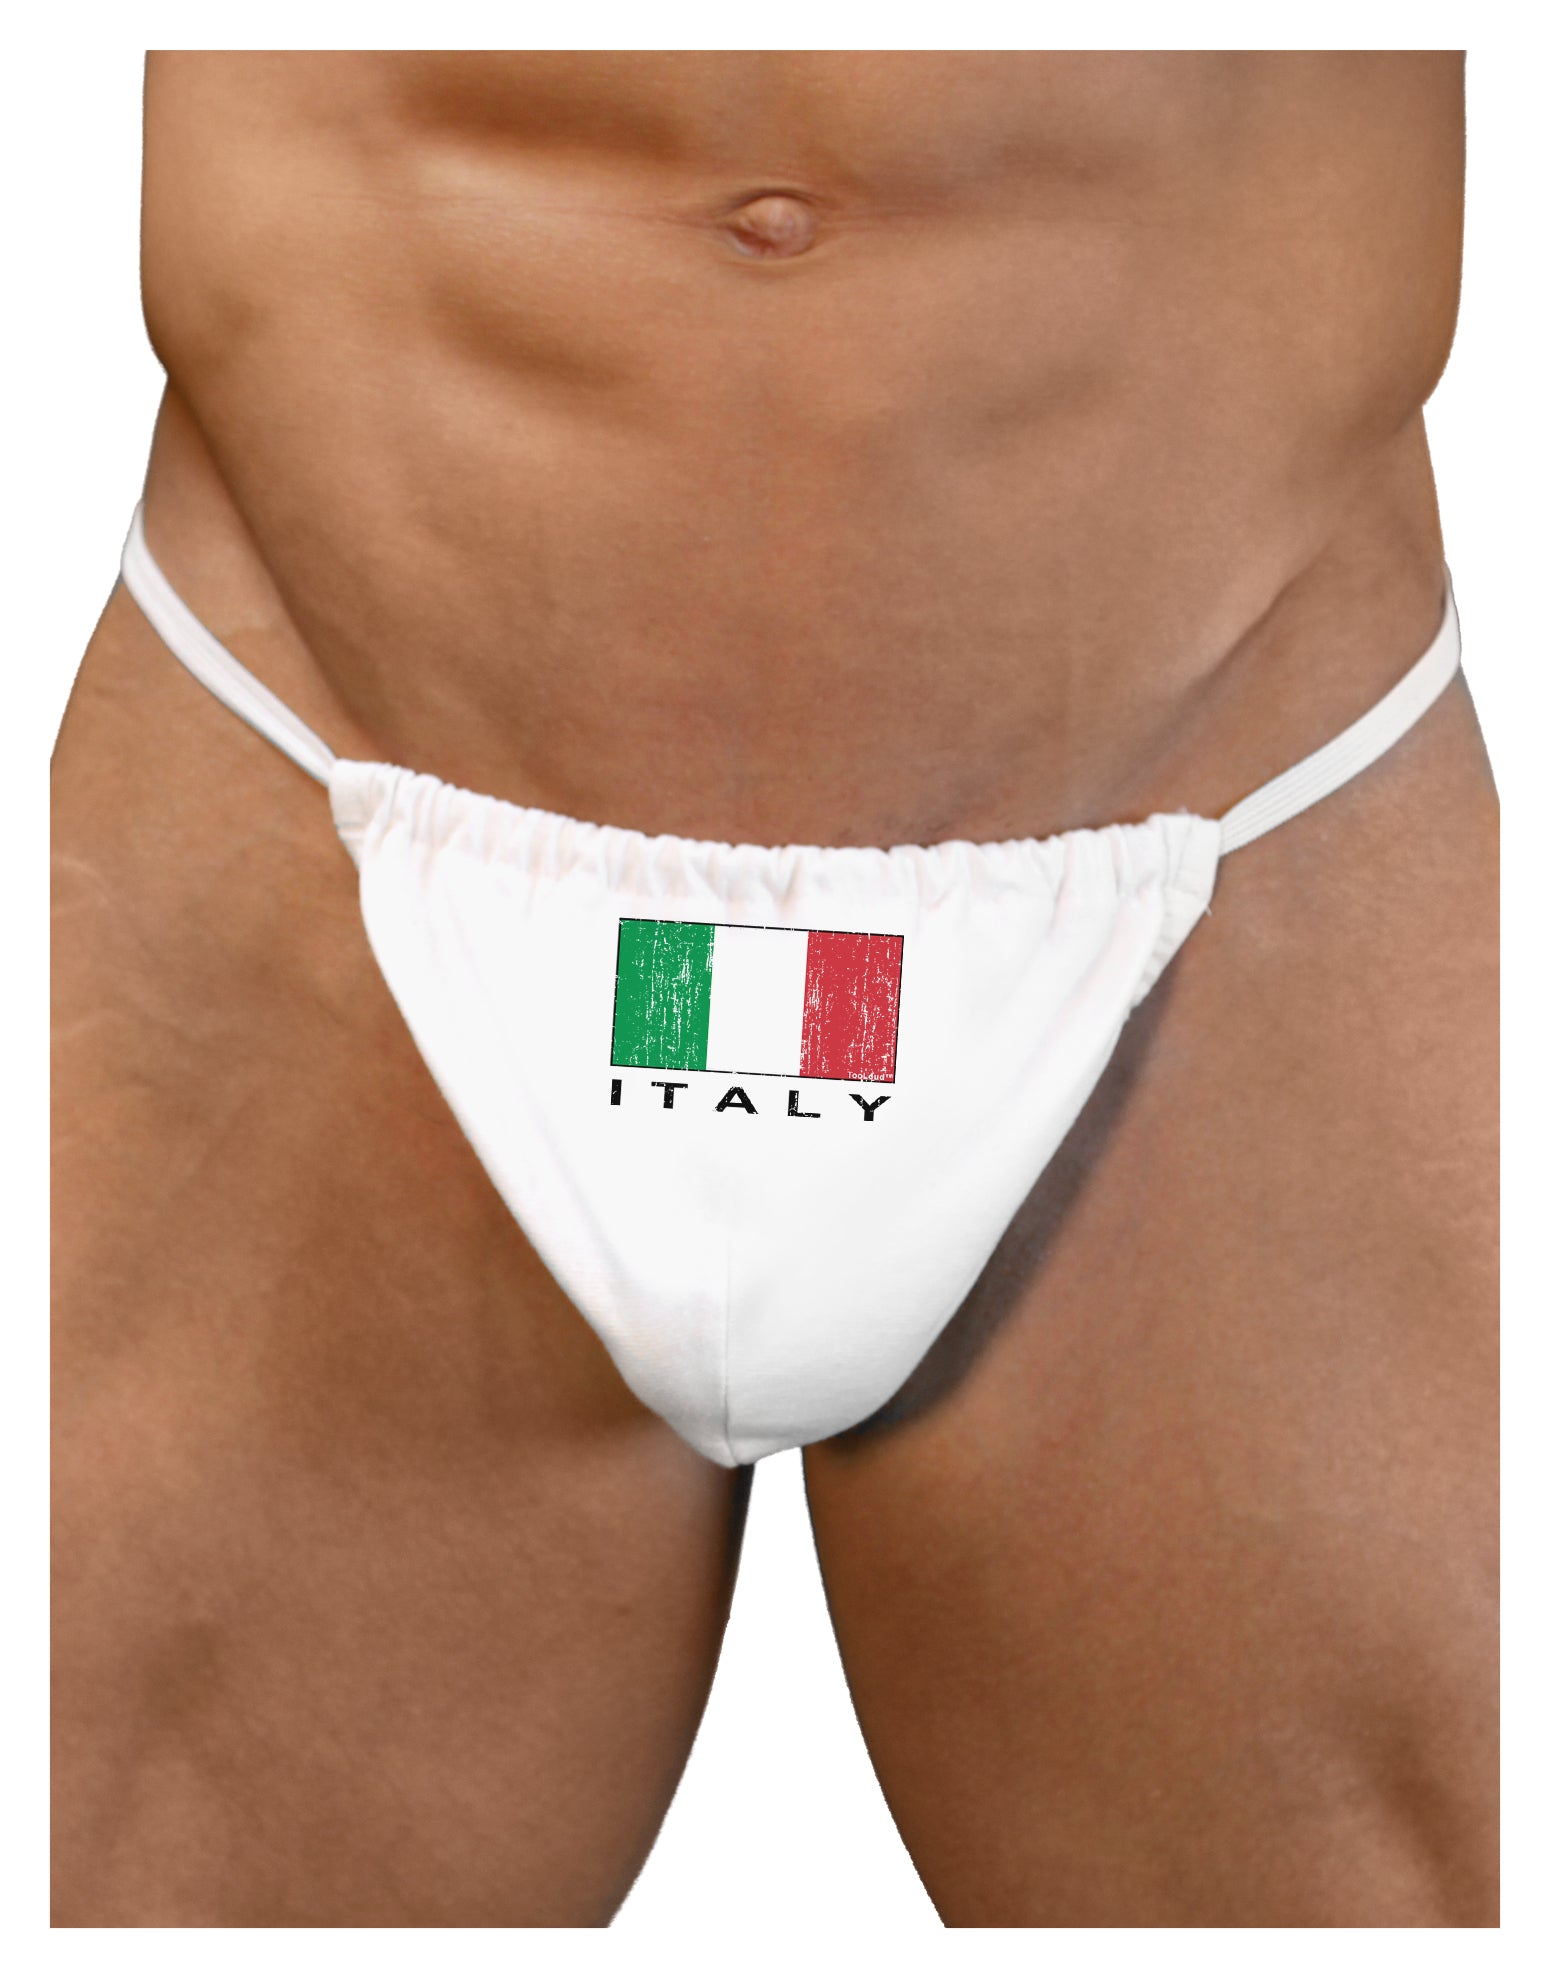 Italian Flag - Italy Text Distressed Mens G-String Underwear by TooLoud